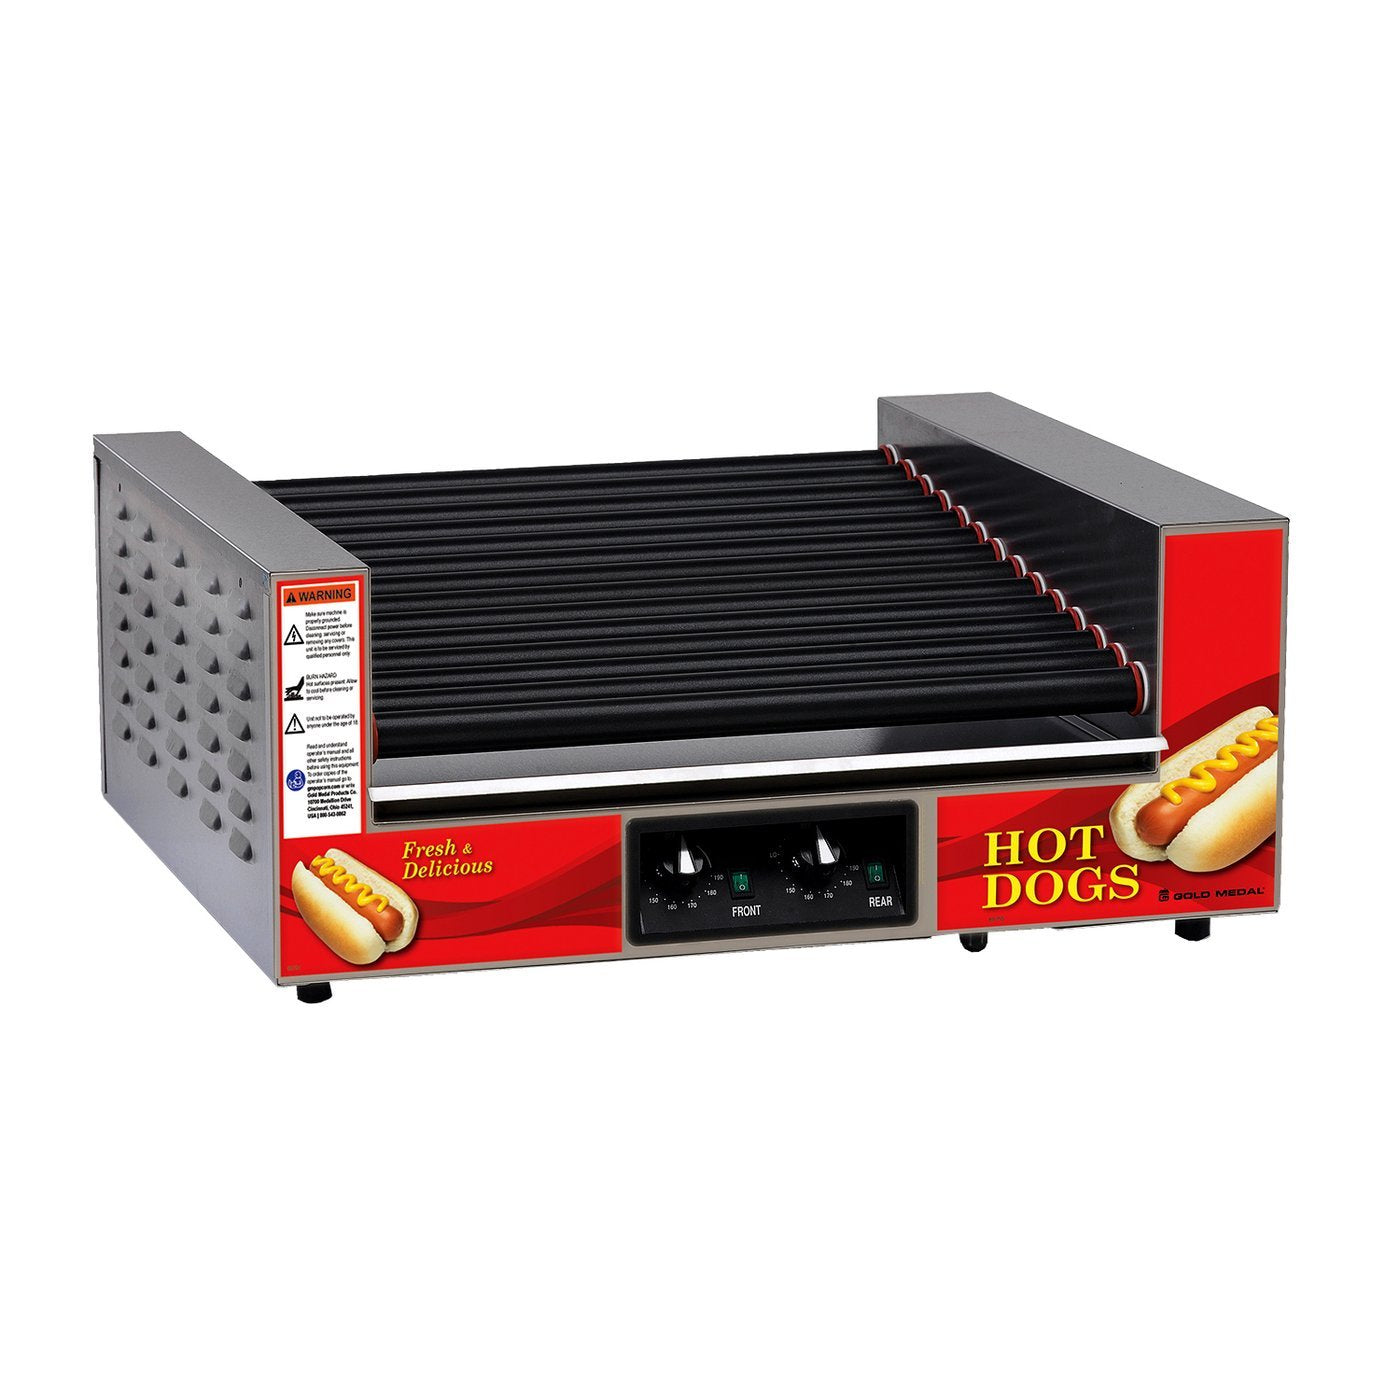 Double Diggity Hot Dog Roller Grill #8223PE